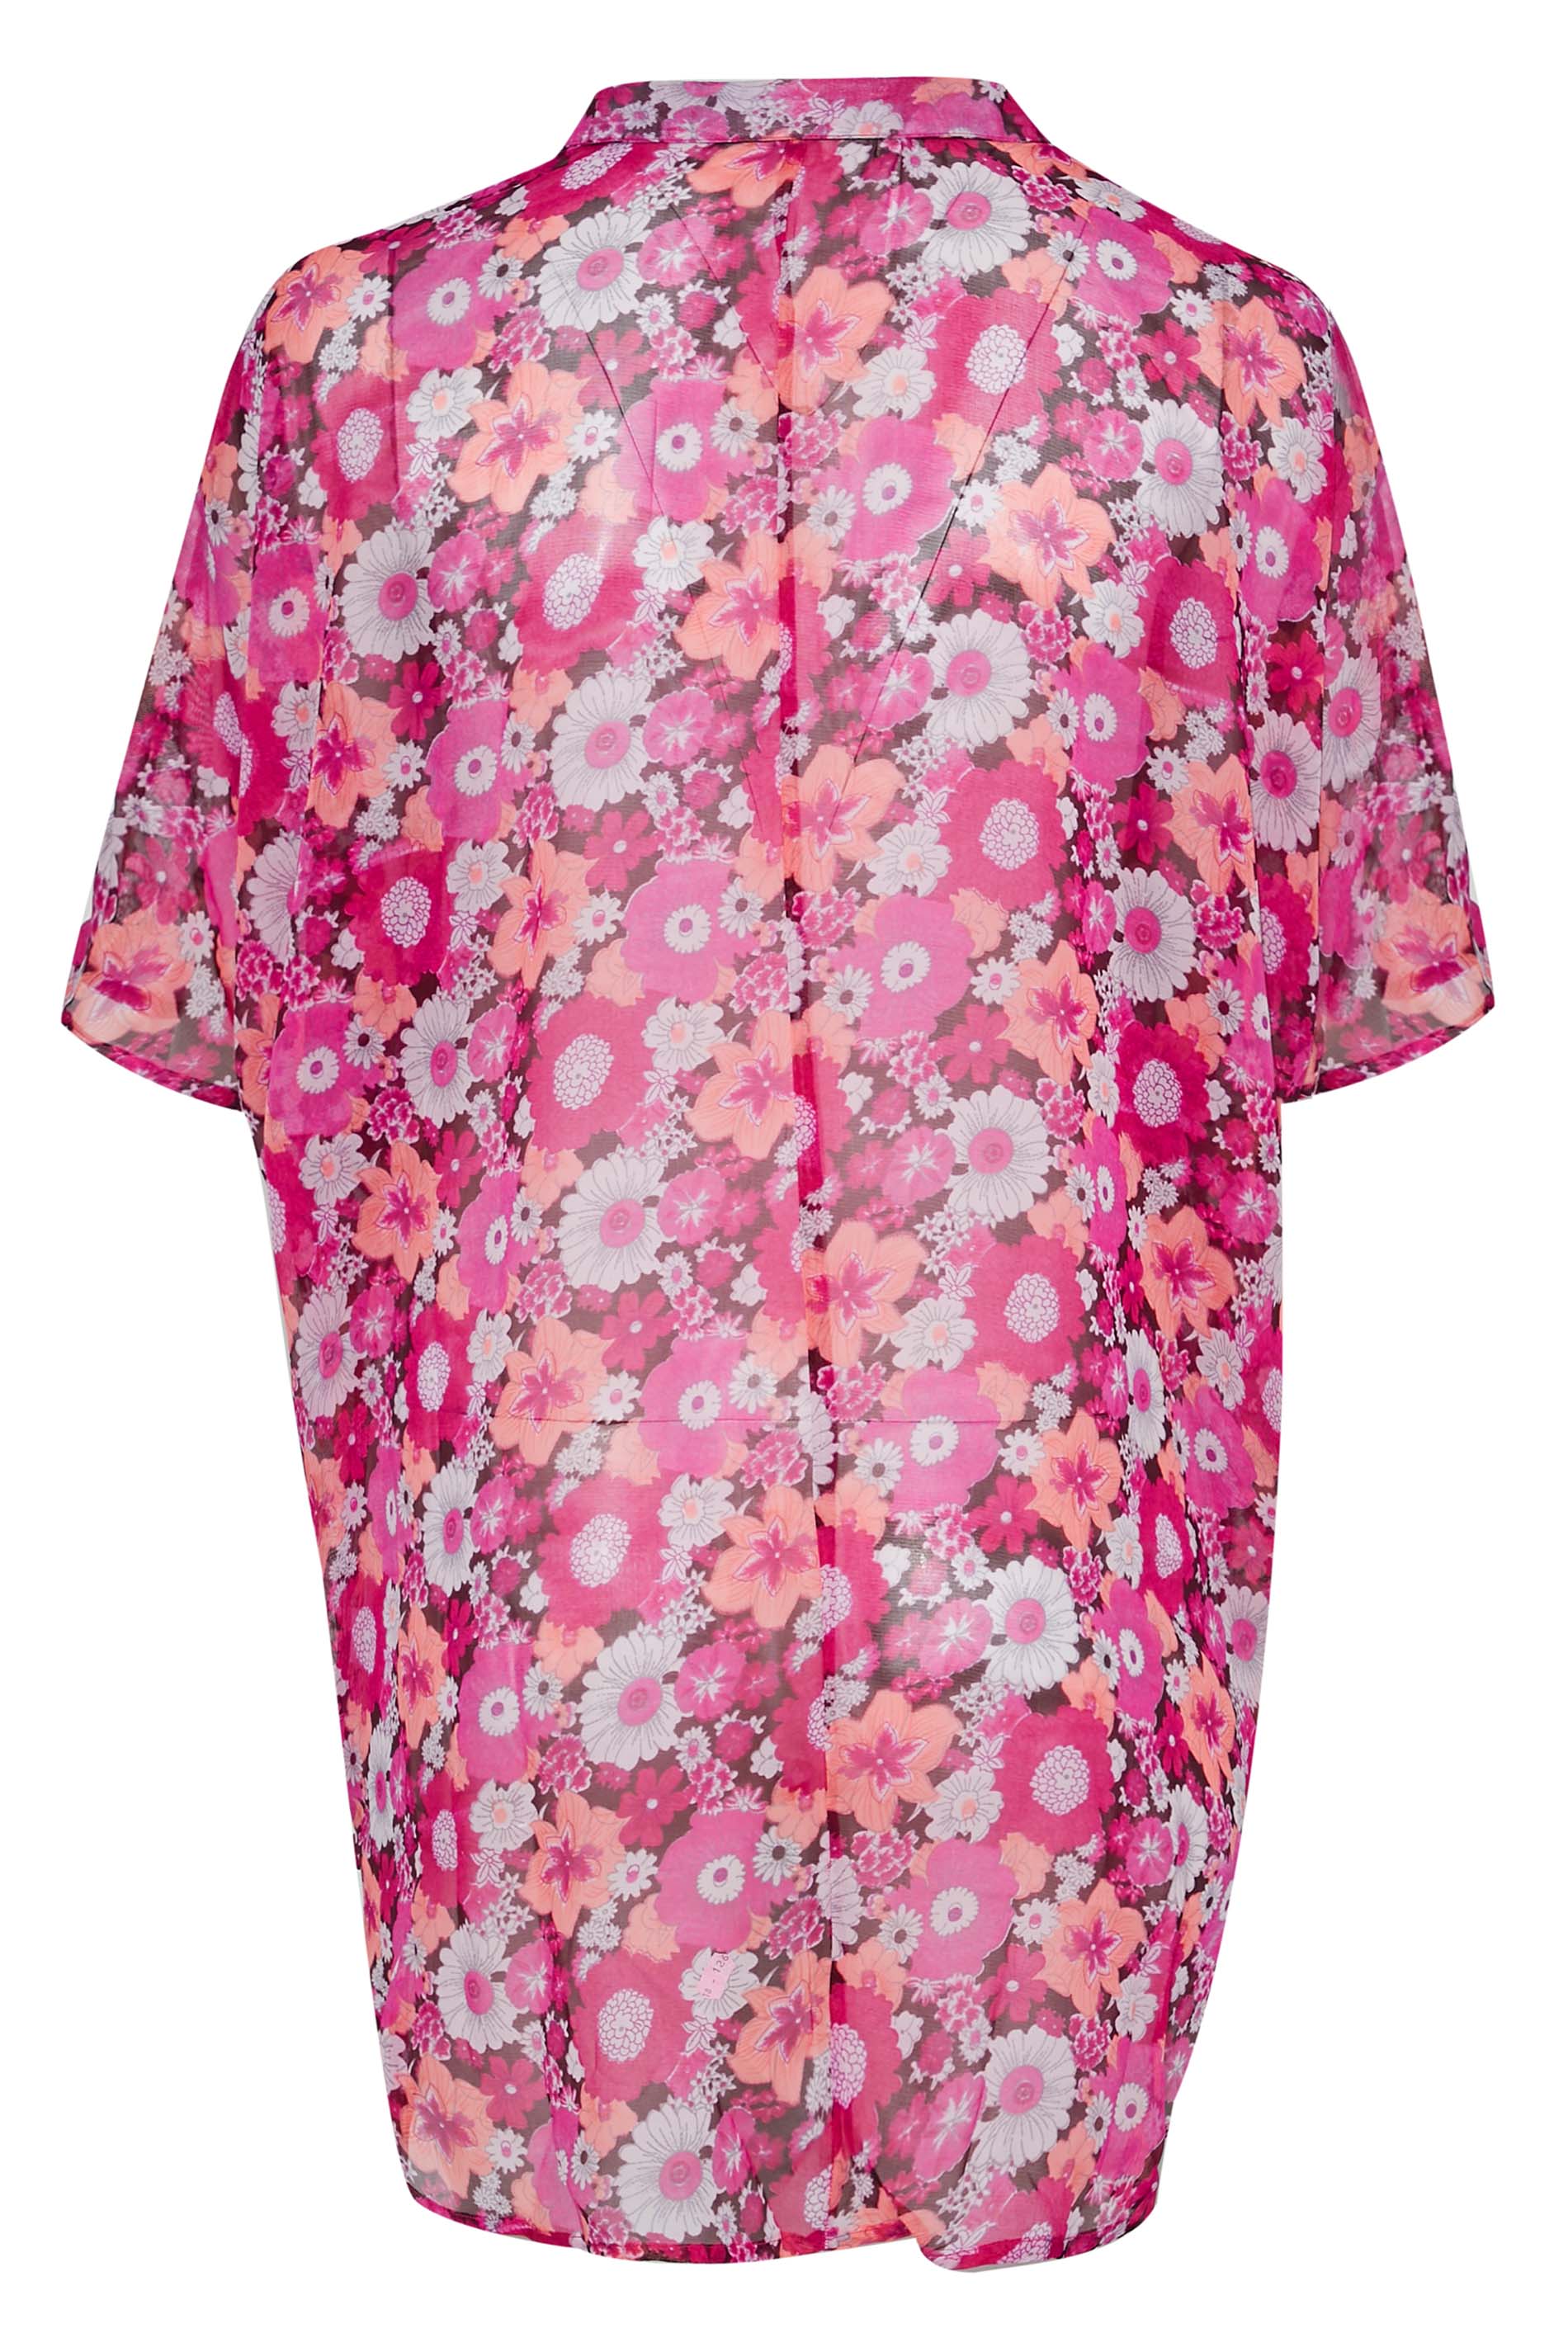 Grande taille  Tops Grande taille  Blouses & Chemisiers | Curve Pink Floral Print Batwing Blouse - IF07538